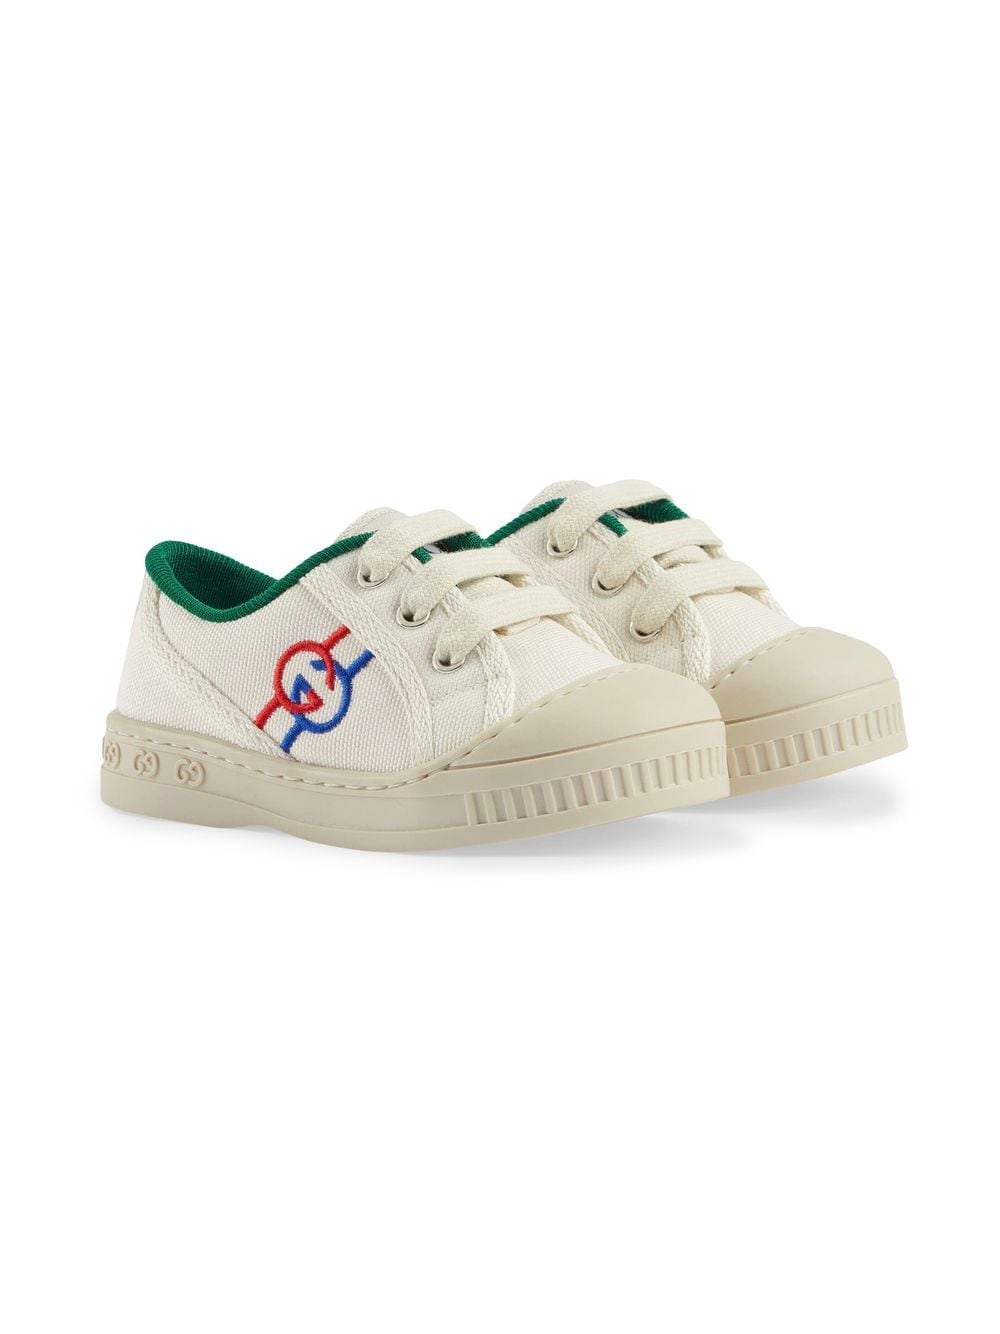 White sneakers for children with logo